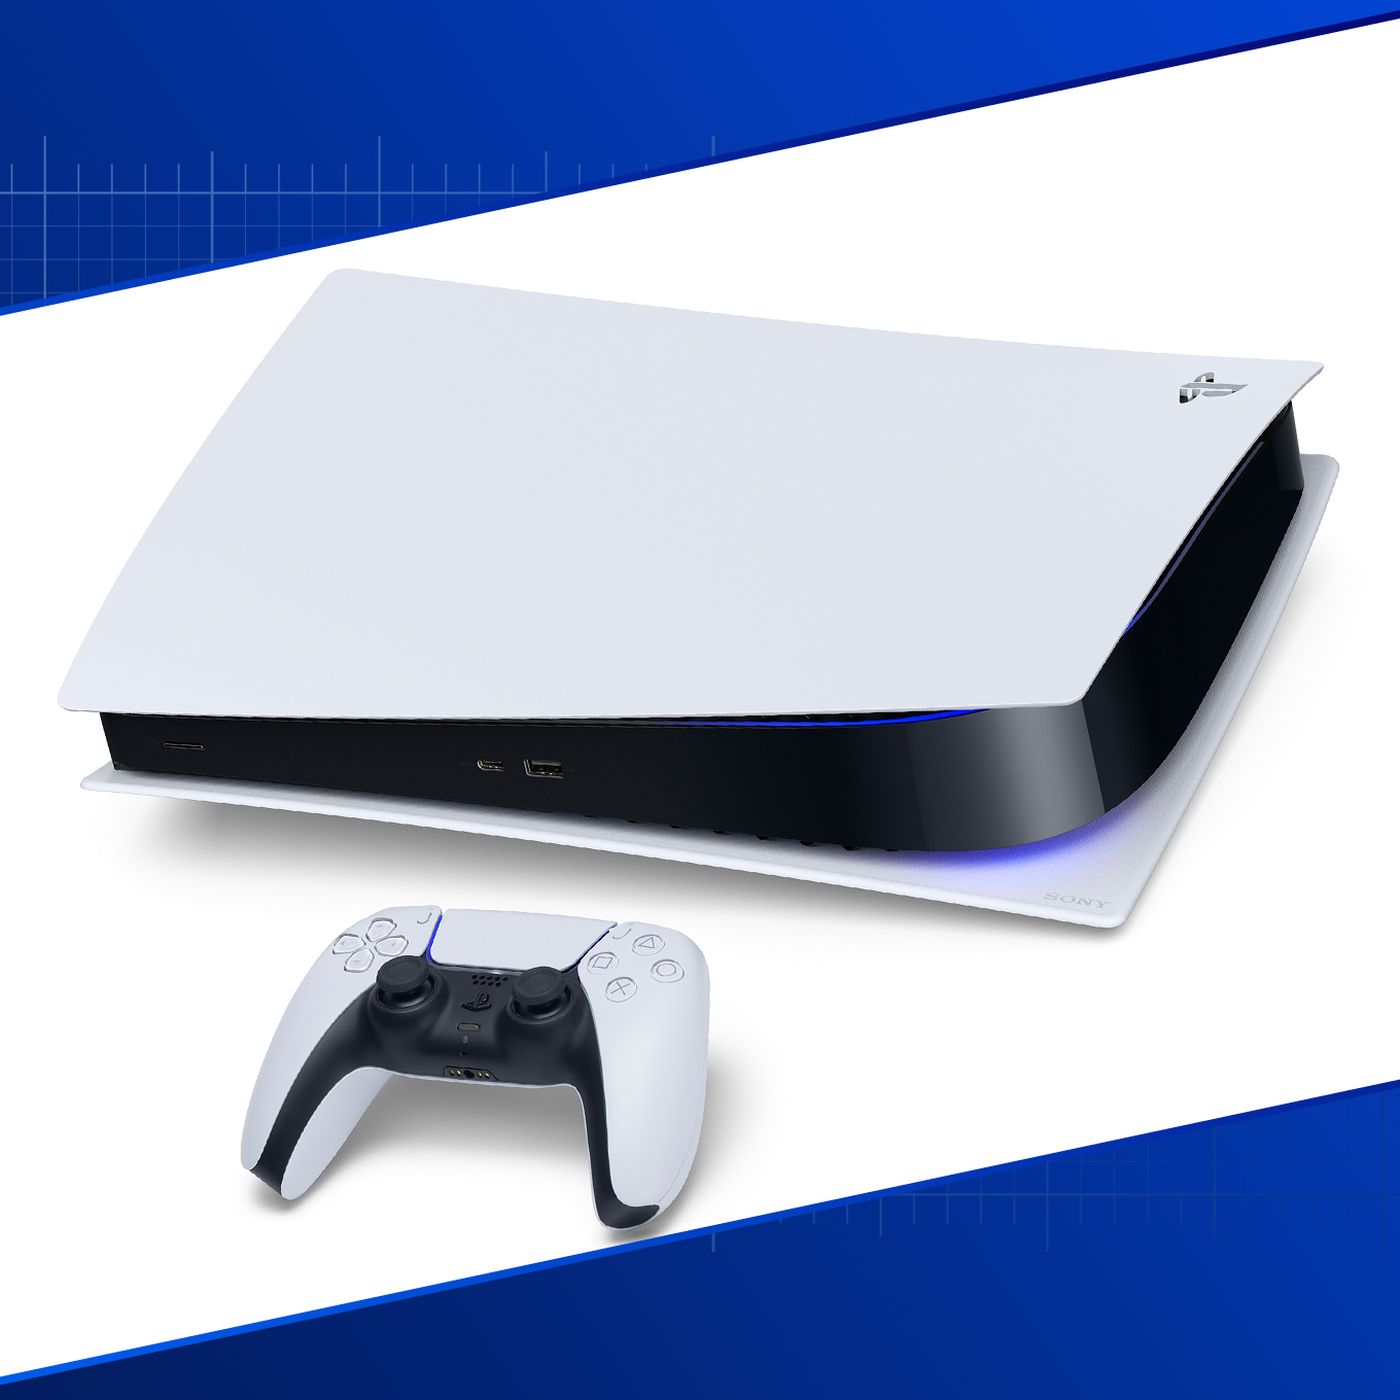 PS5 details: games, price, release date, backward compatibility, and more